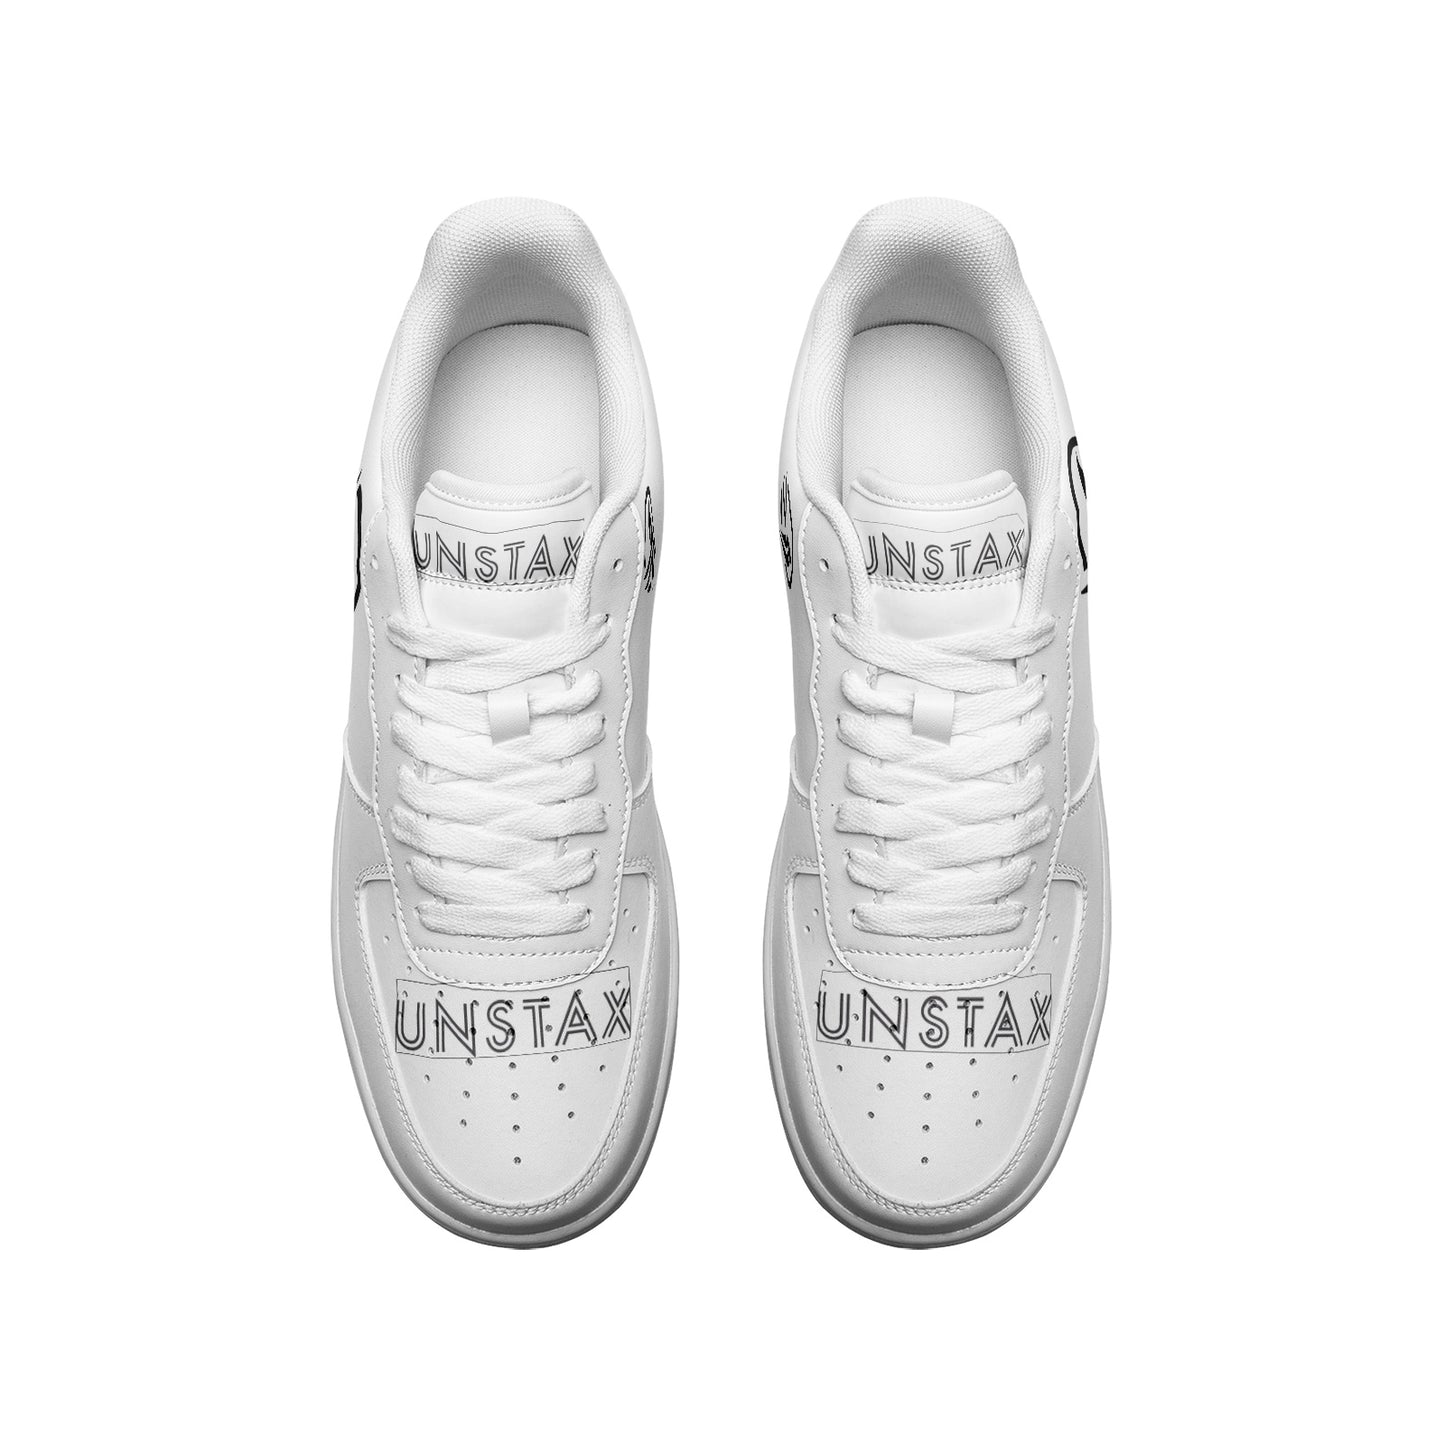 Through All Obstacles Unstax Sneakers(Black on White)